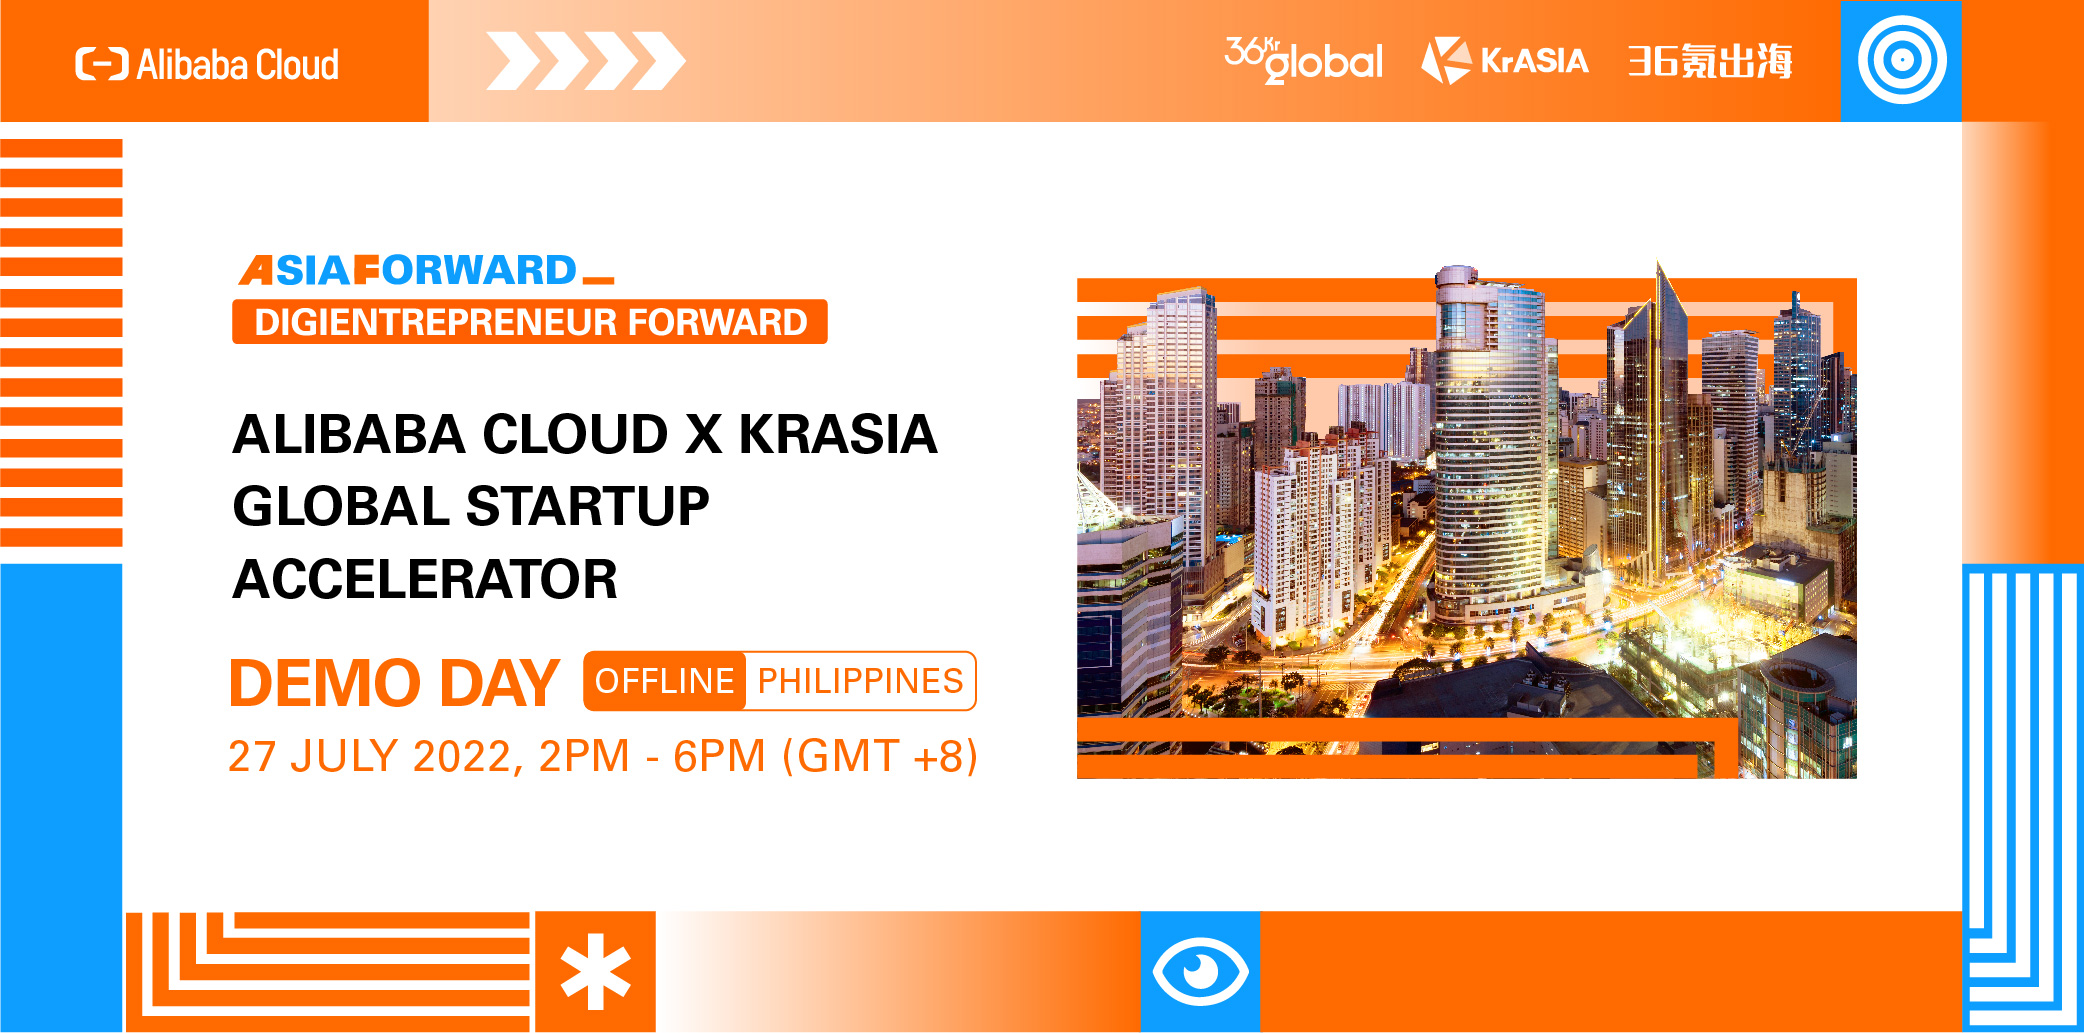 Apply to take part in the next Alibaba Cloud x KrASIA Global Startup Accelerator Philippines Demo Day